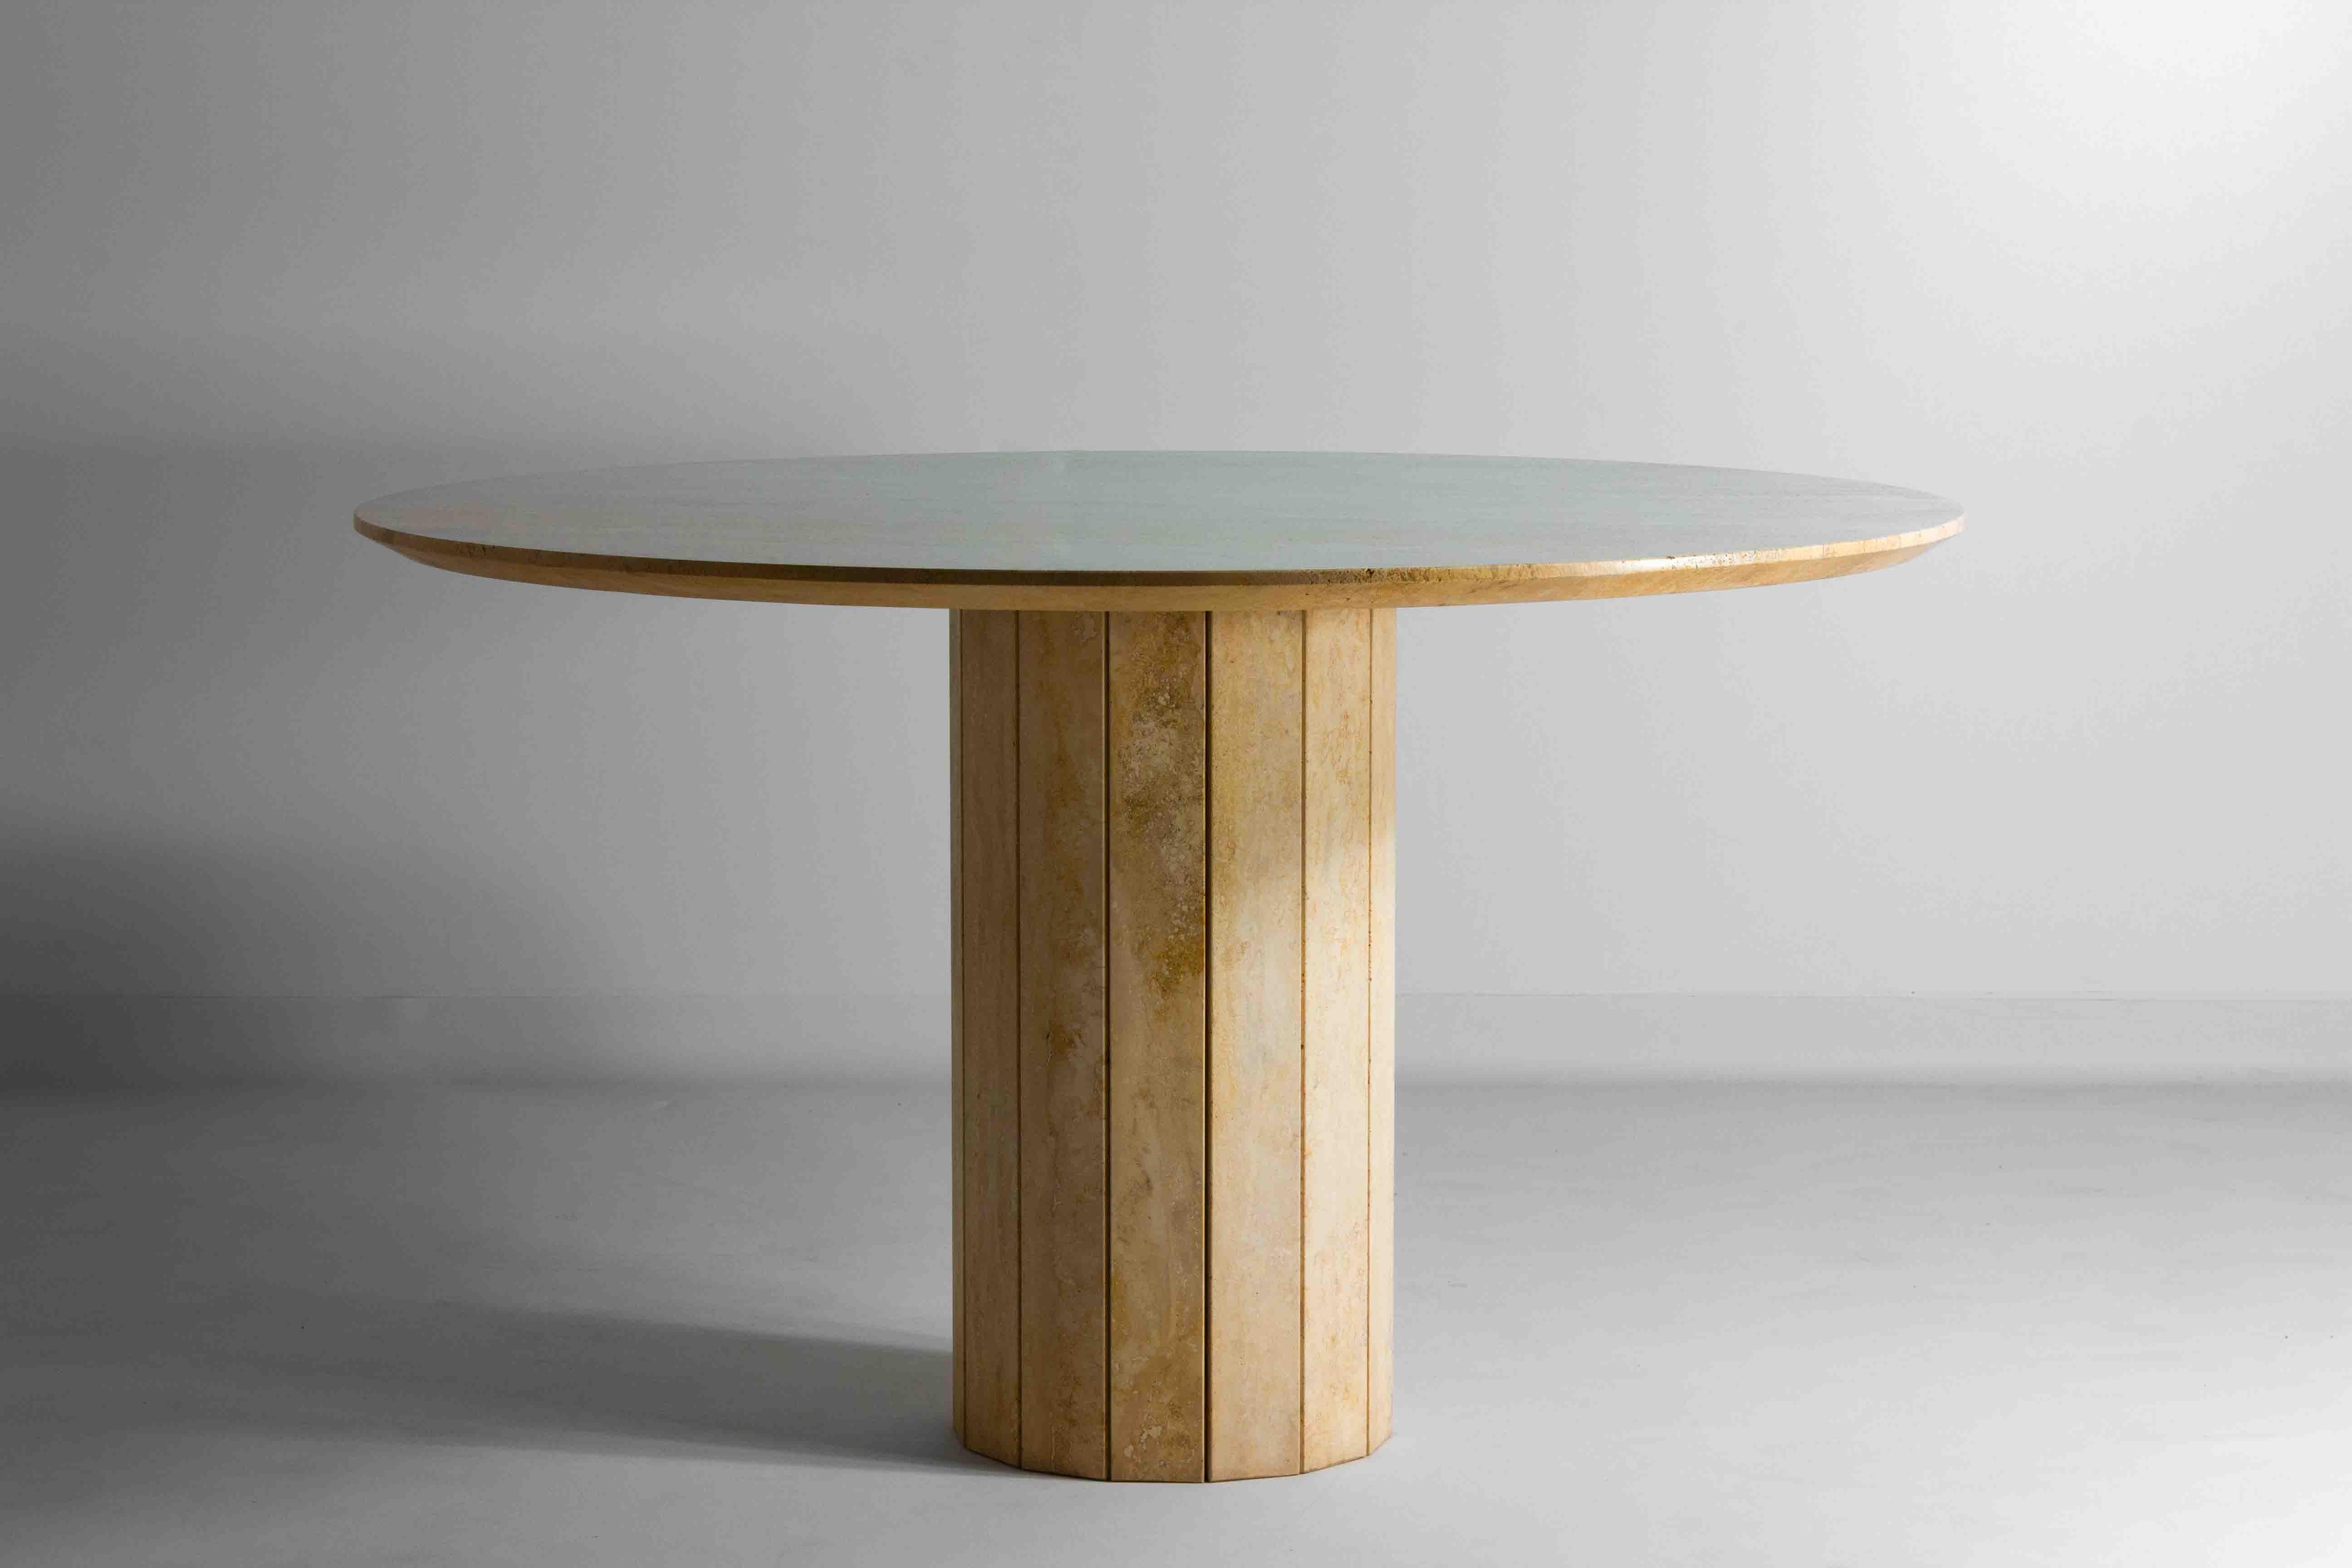 This exquisite round dining table in Italian travertine features natural wave patterns in the table top. This piece is in perfect condition and easily seats 6 people